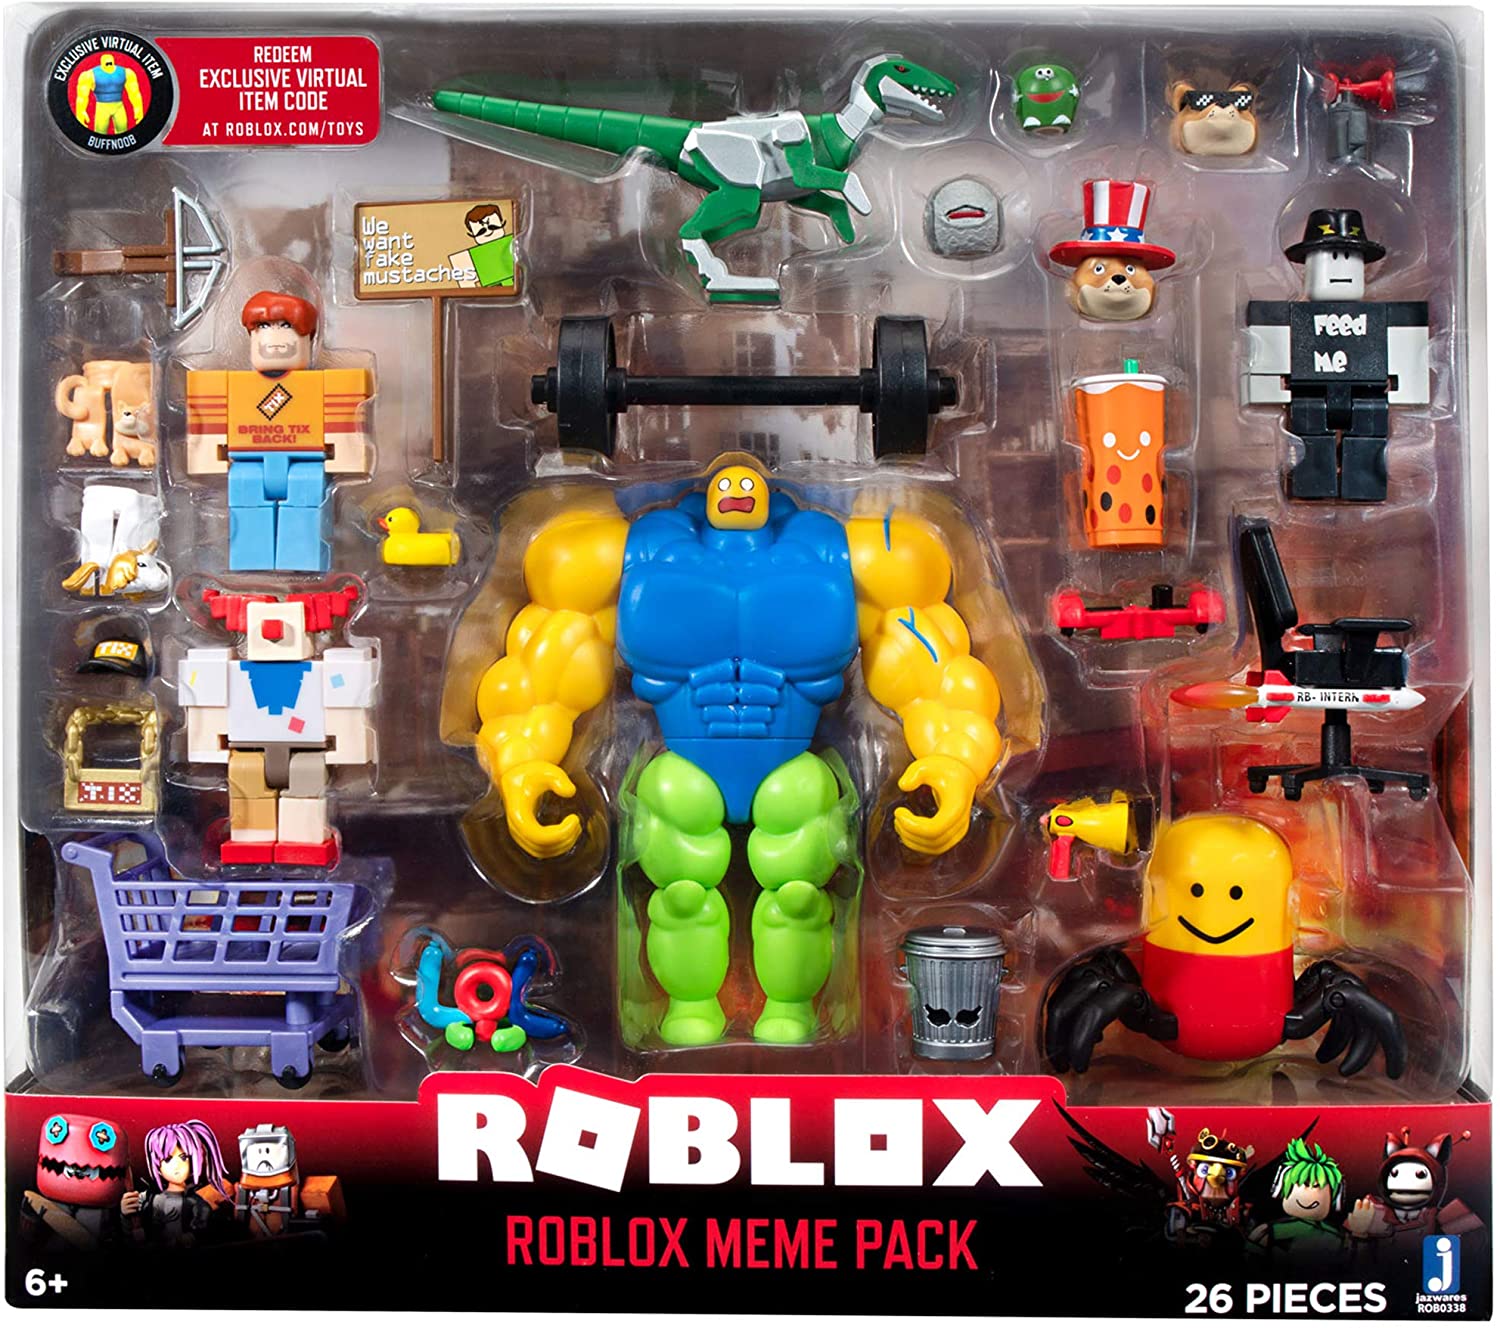 Dueldroid 5000 With Virtual Game Code Accessories Roblox Toys Action Figures Tv Movie Video Games Djroncarpenito Toys Hobbies - roblox keeps spinning